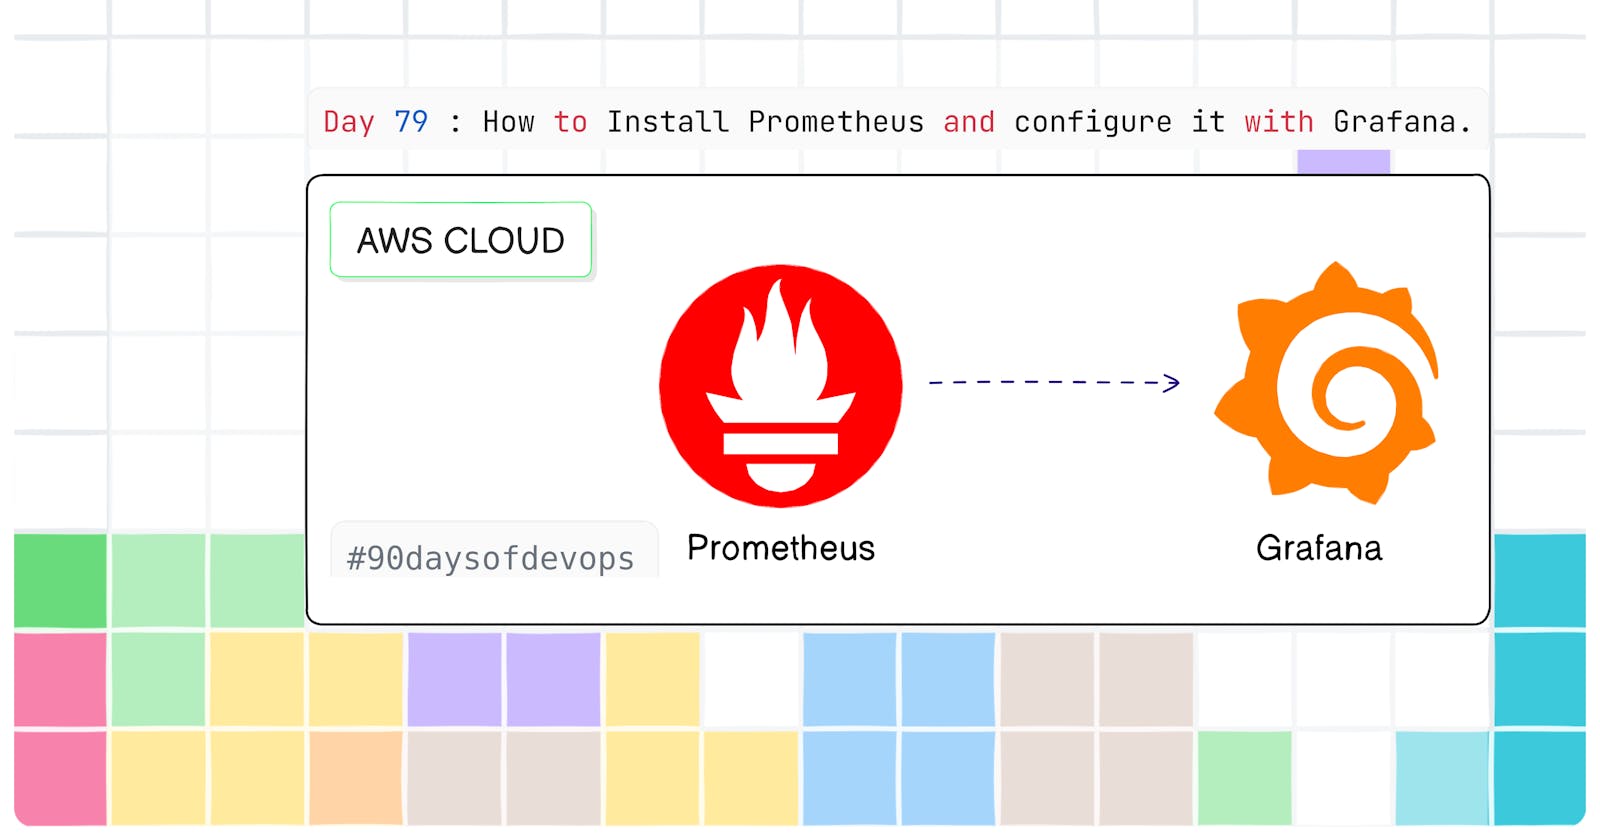 Day 79 : How to Install Prometheus and configure it with Grafana.